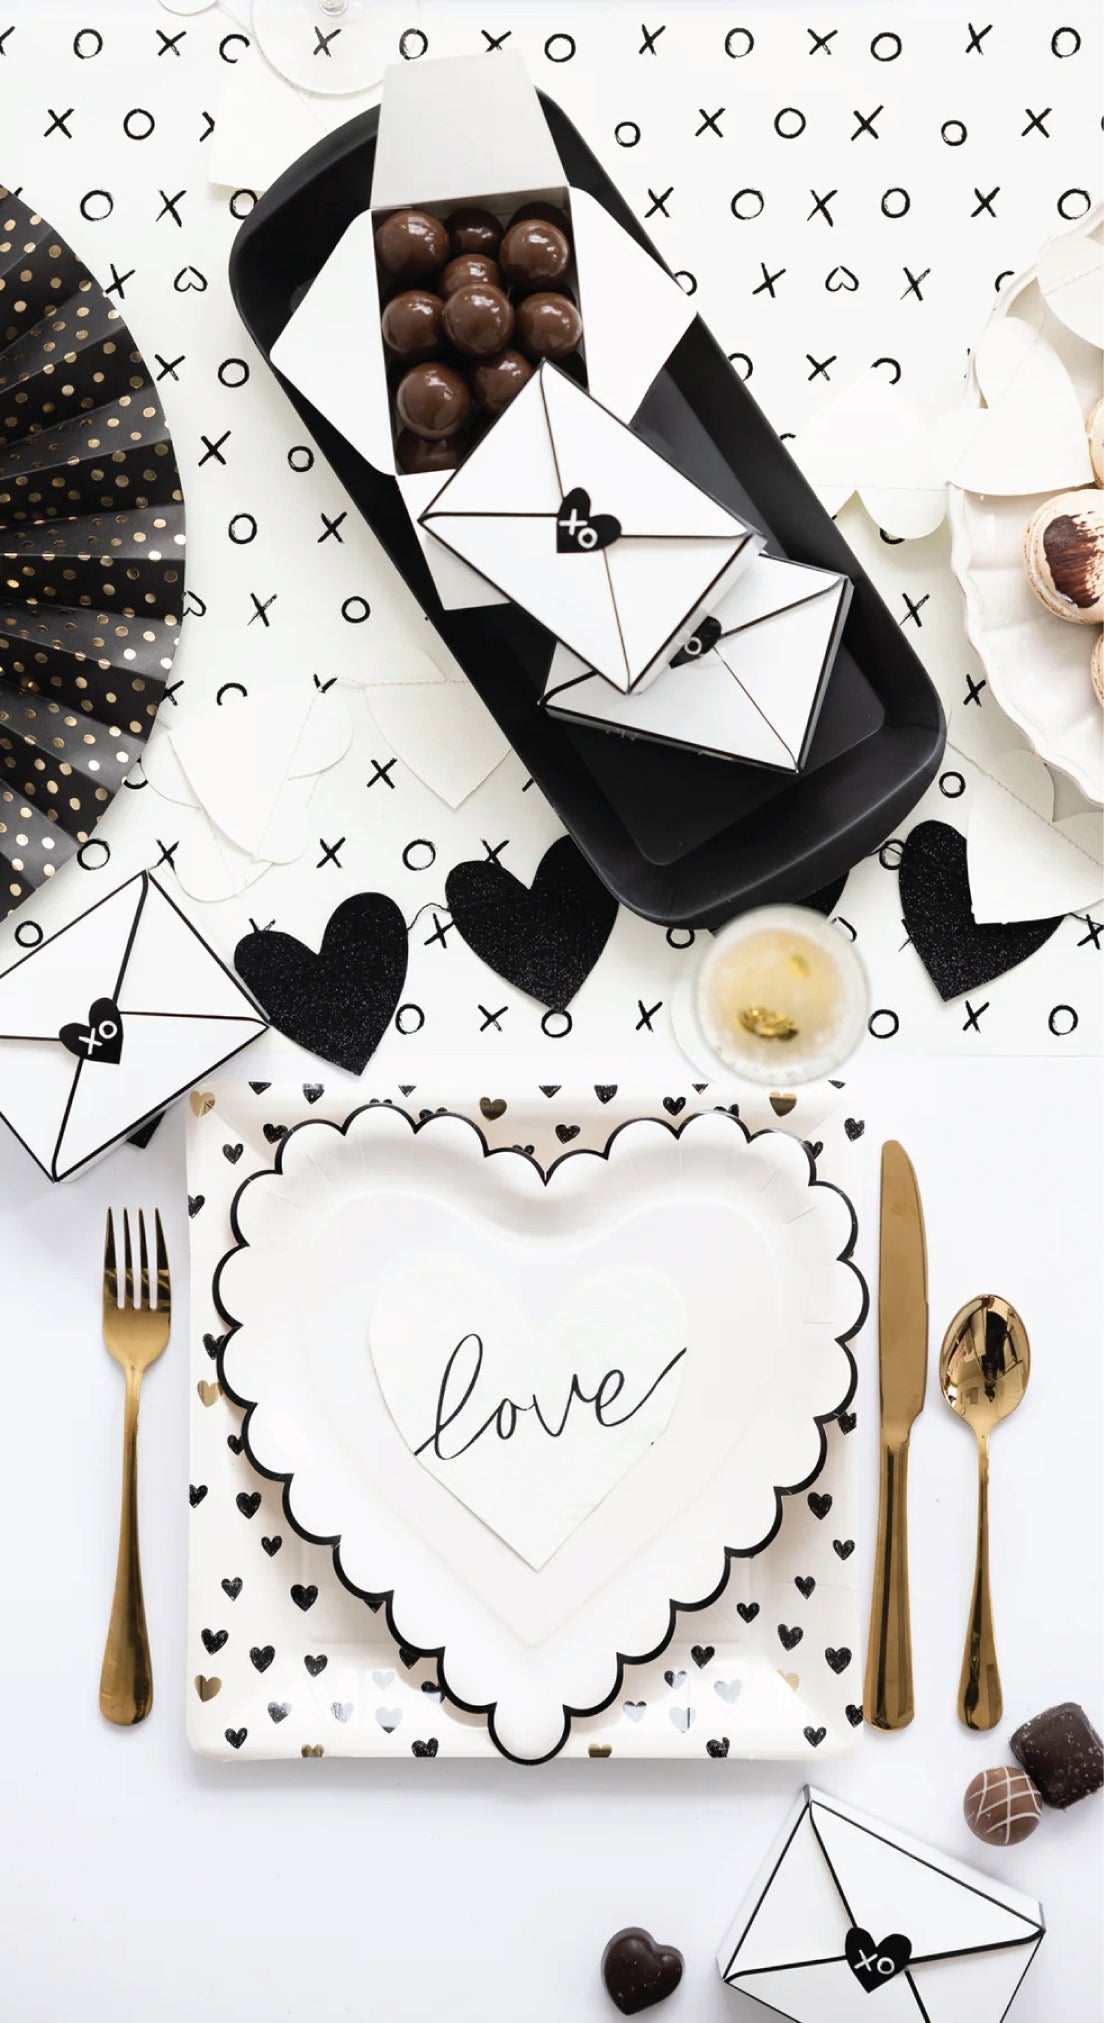 Black & Cream XOXO Paper Table Runner 10ft | The Party Darling